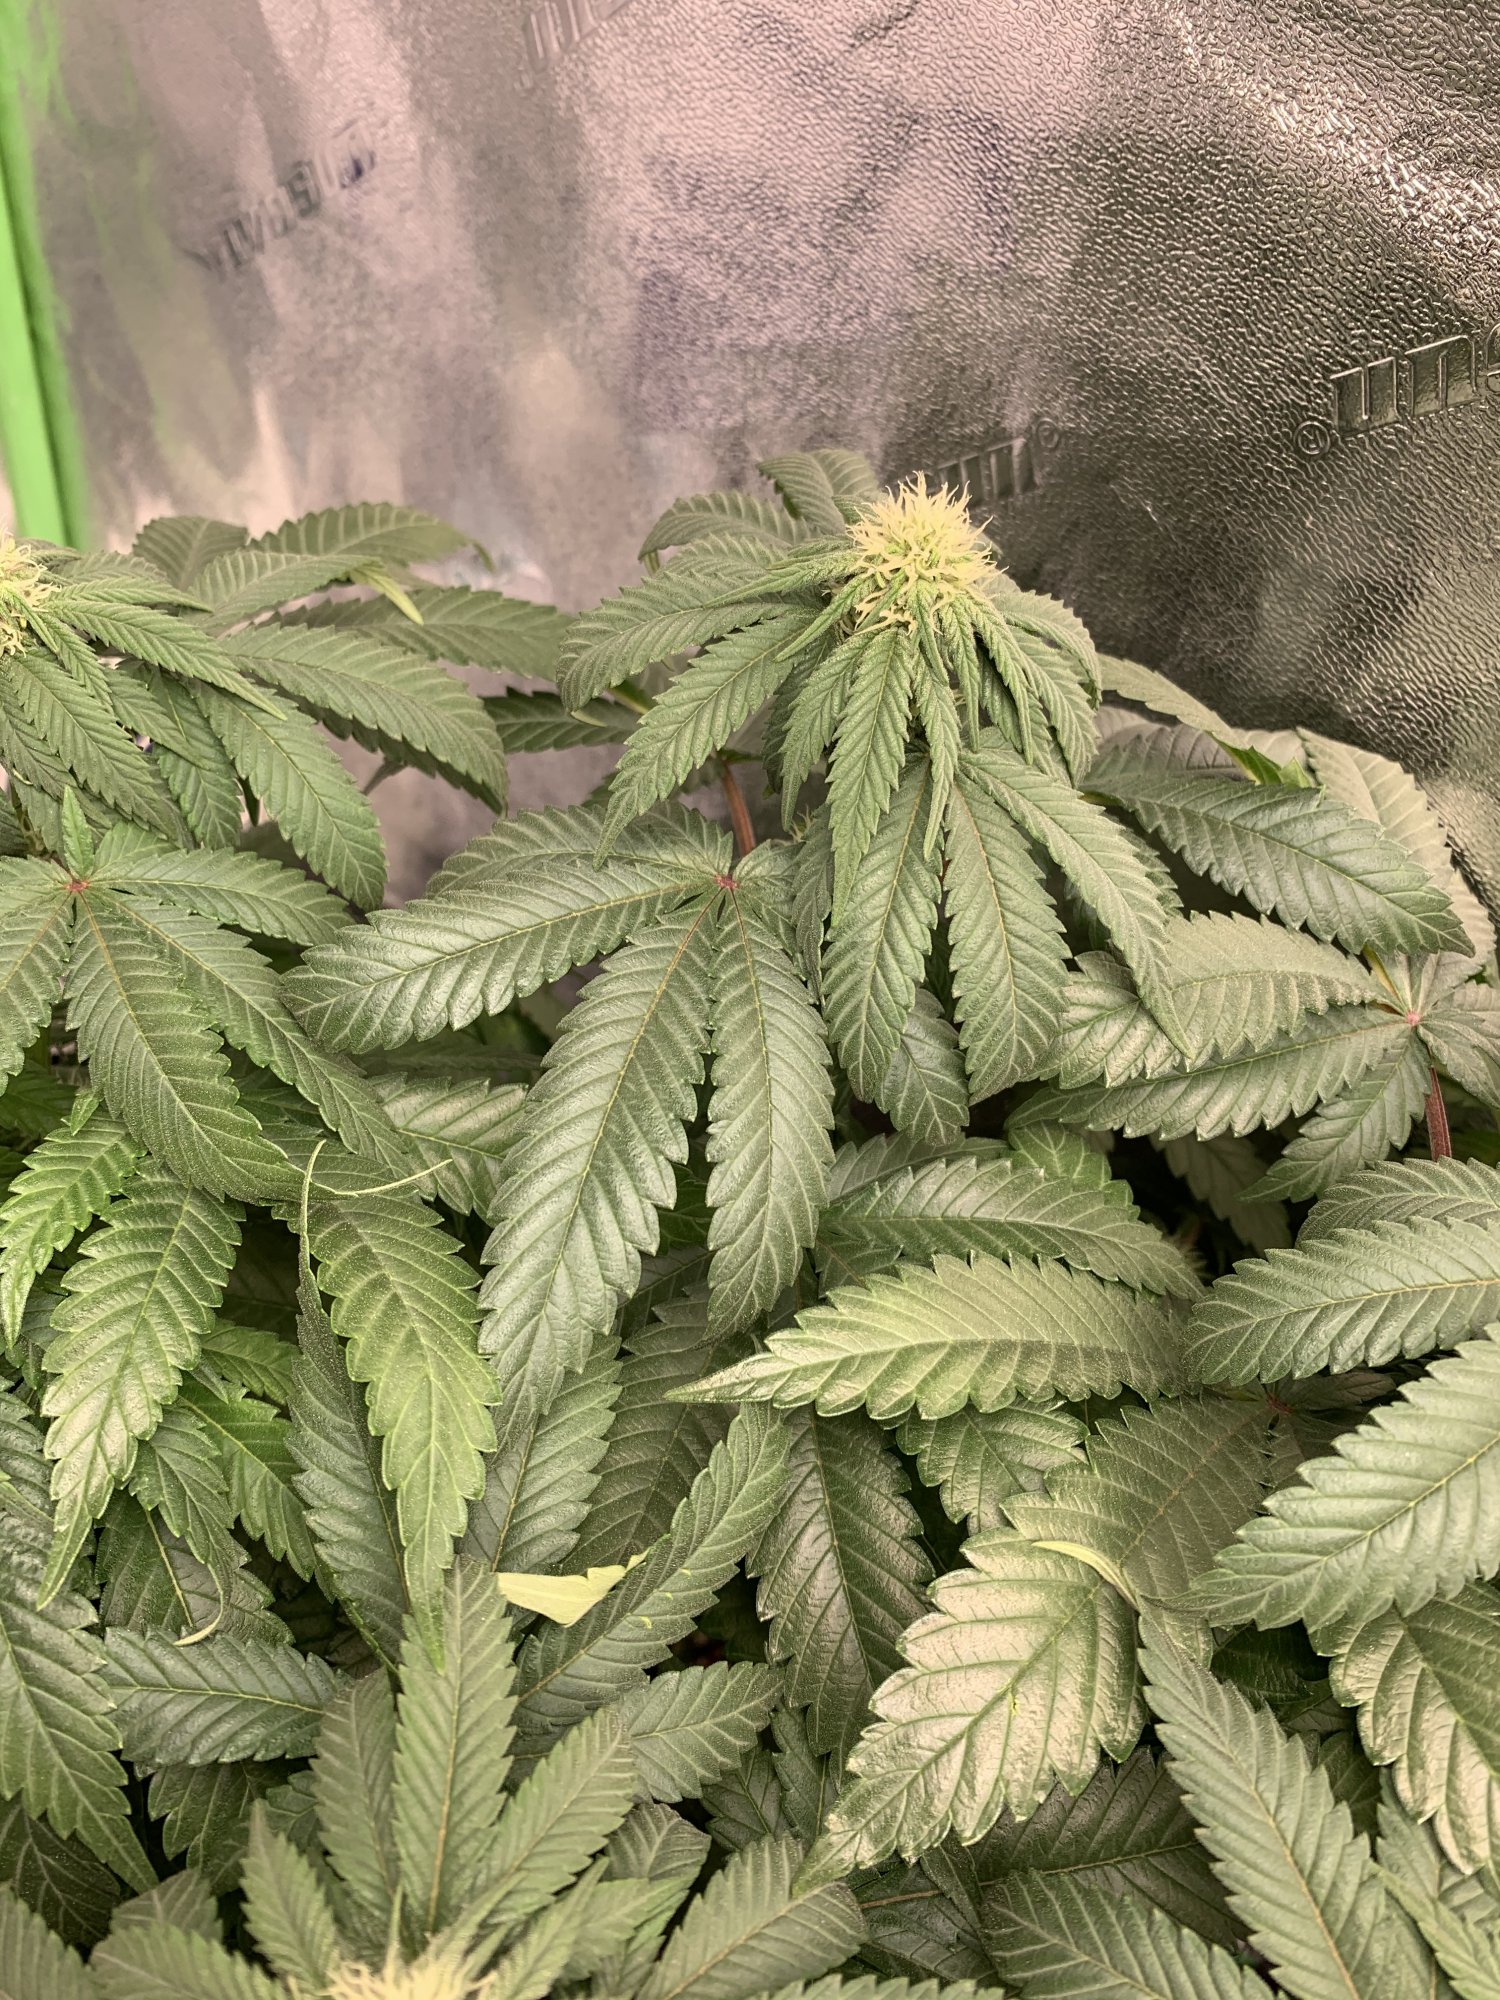 Over watering or a deficiency 3